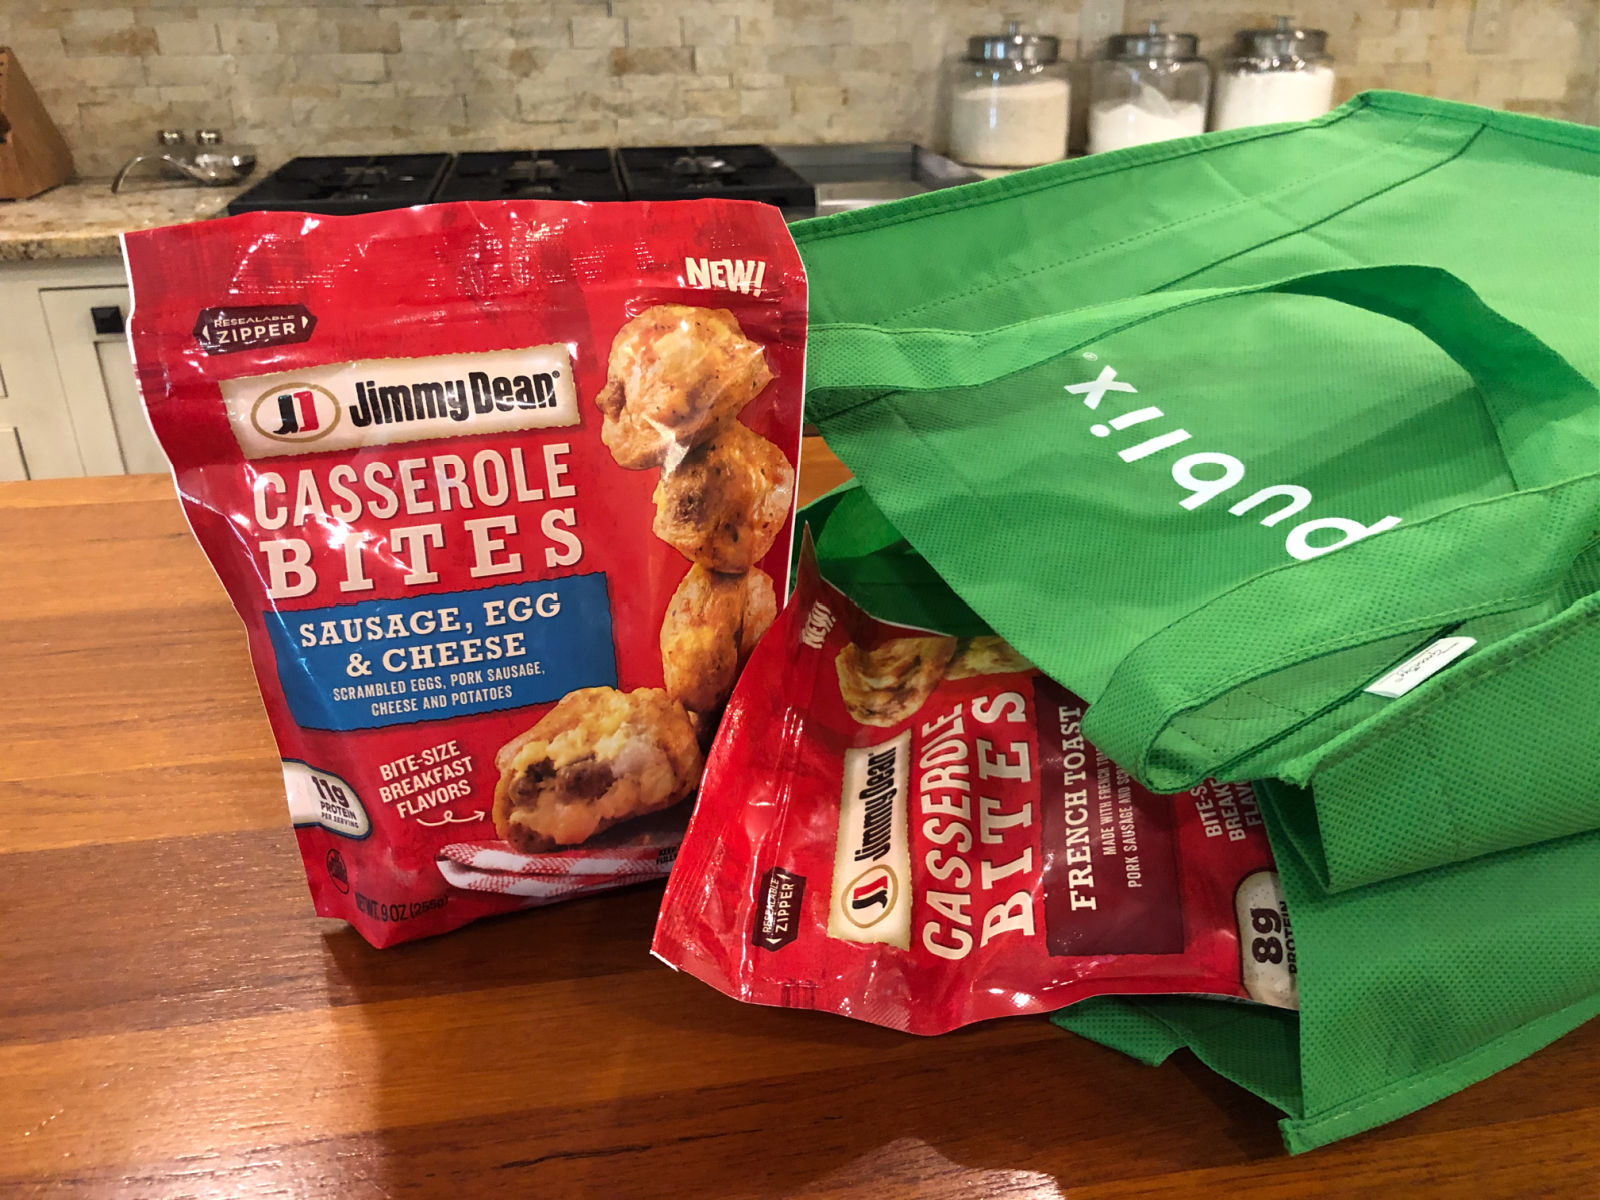 Look For New Jimmy Dean Casserole Bites At Publix – Great Way To Start The Day